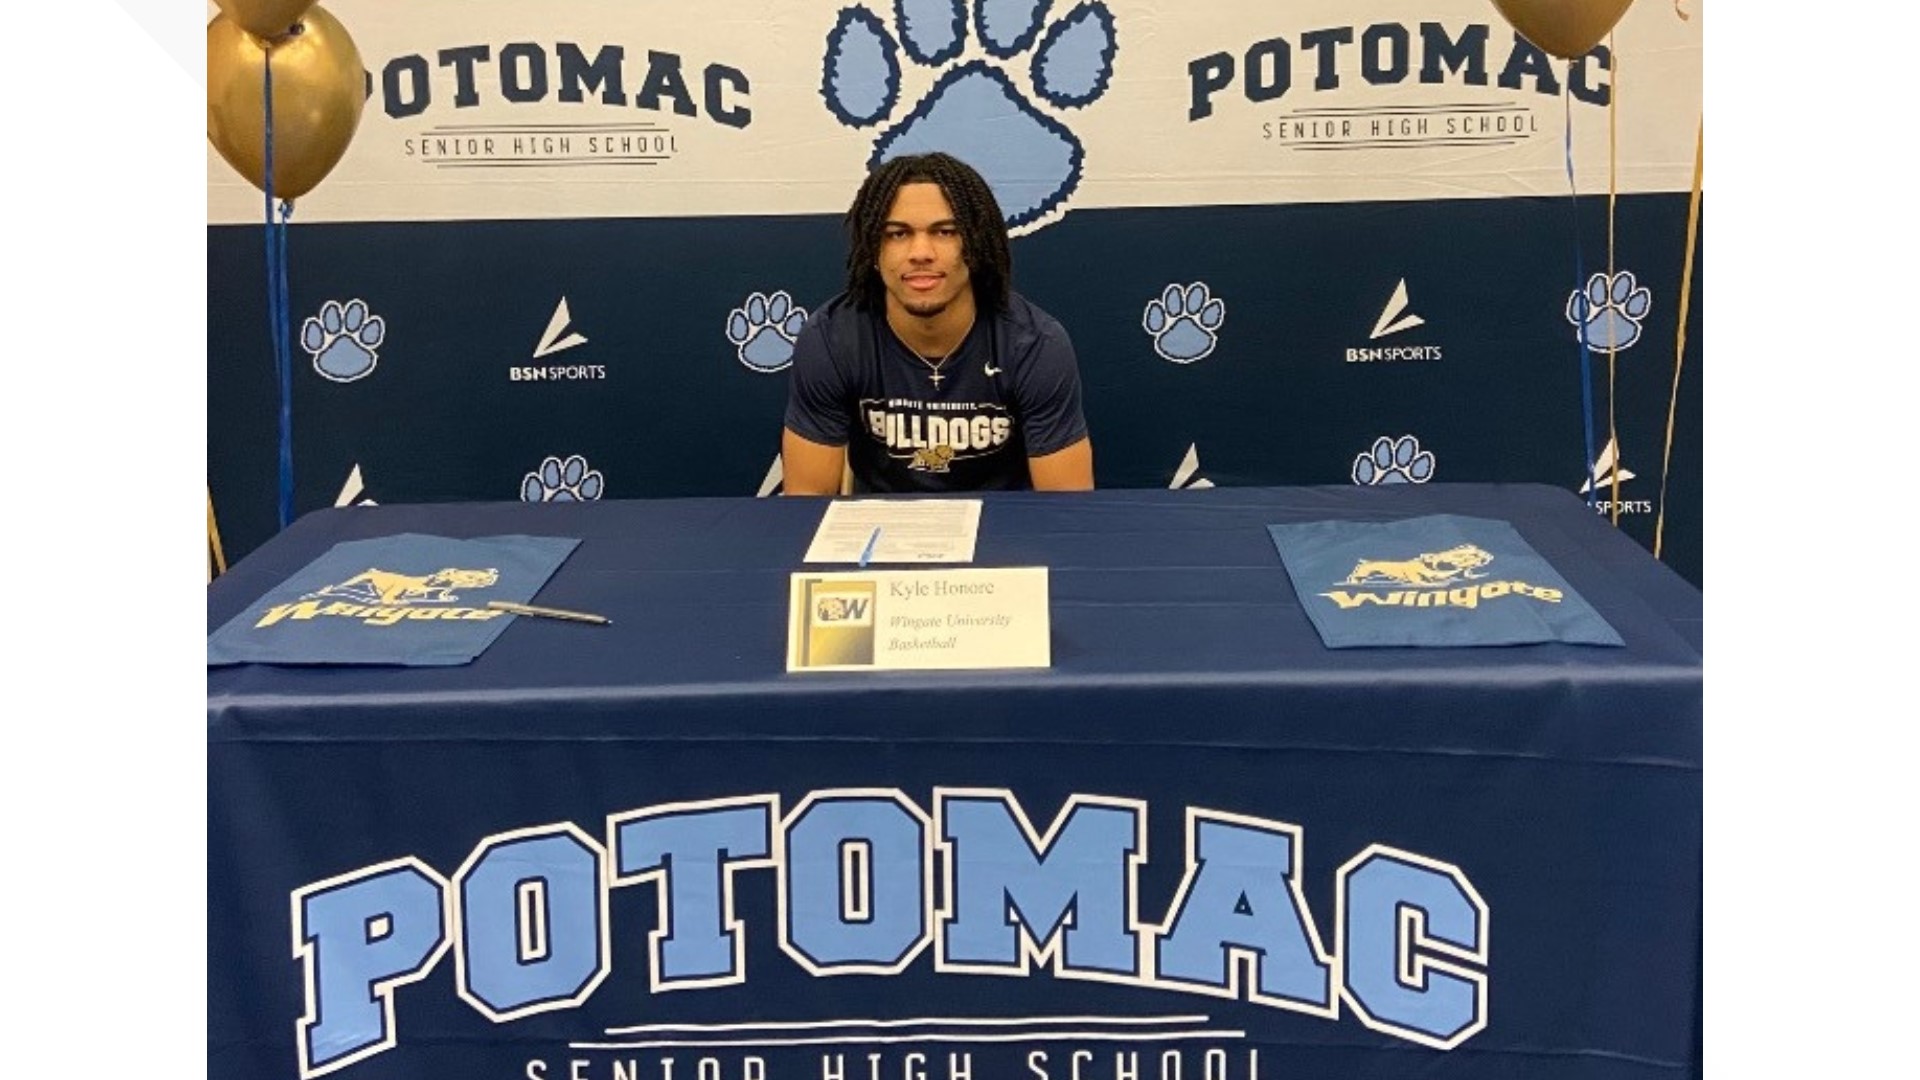 Kyle Honore played basketball for Potomac High School in Dumfries before committing to join Wingate University's team this year.